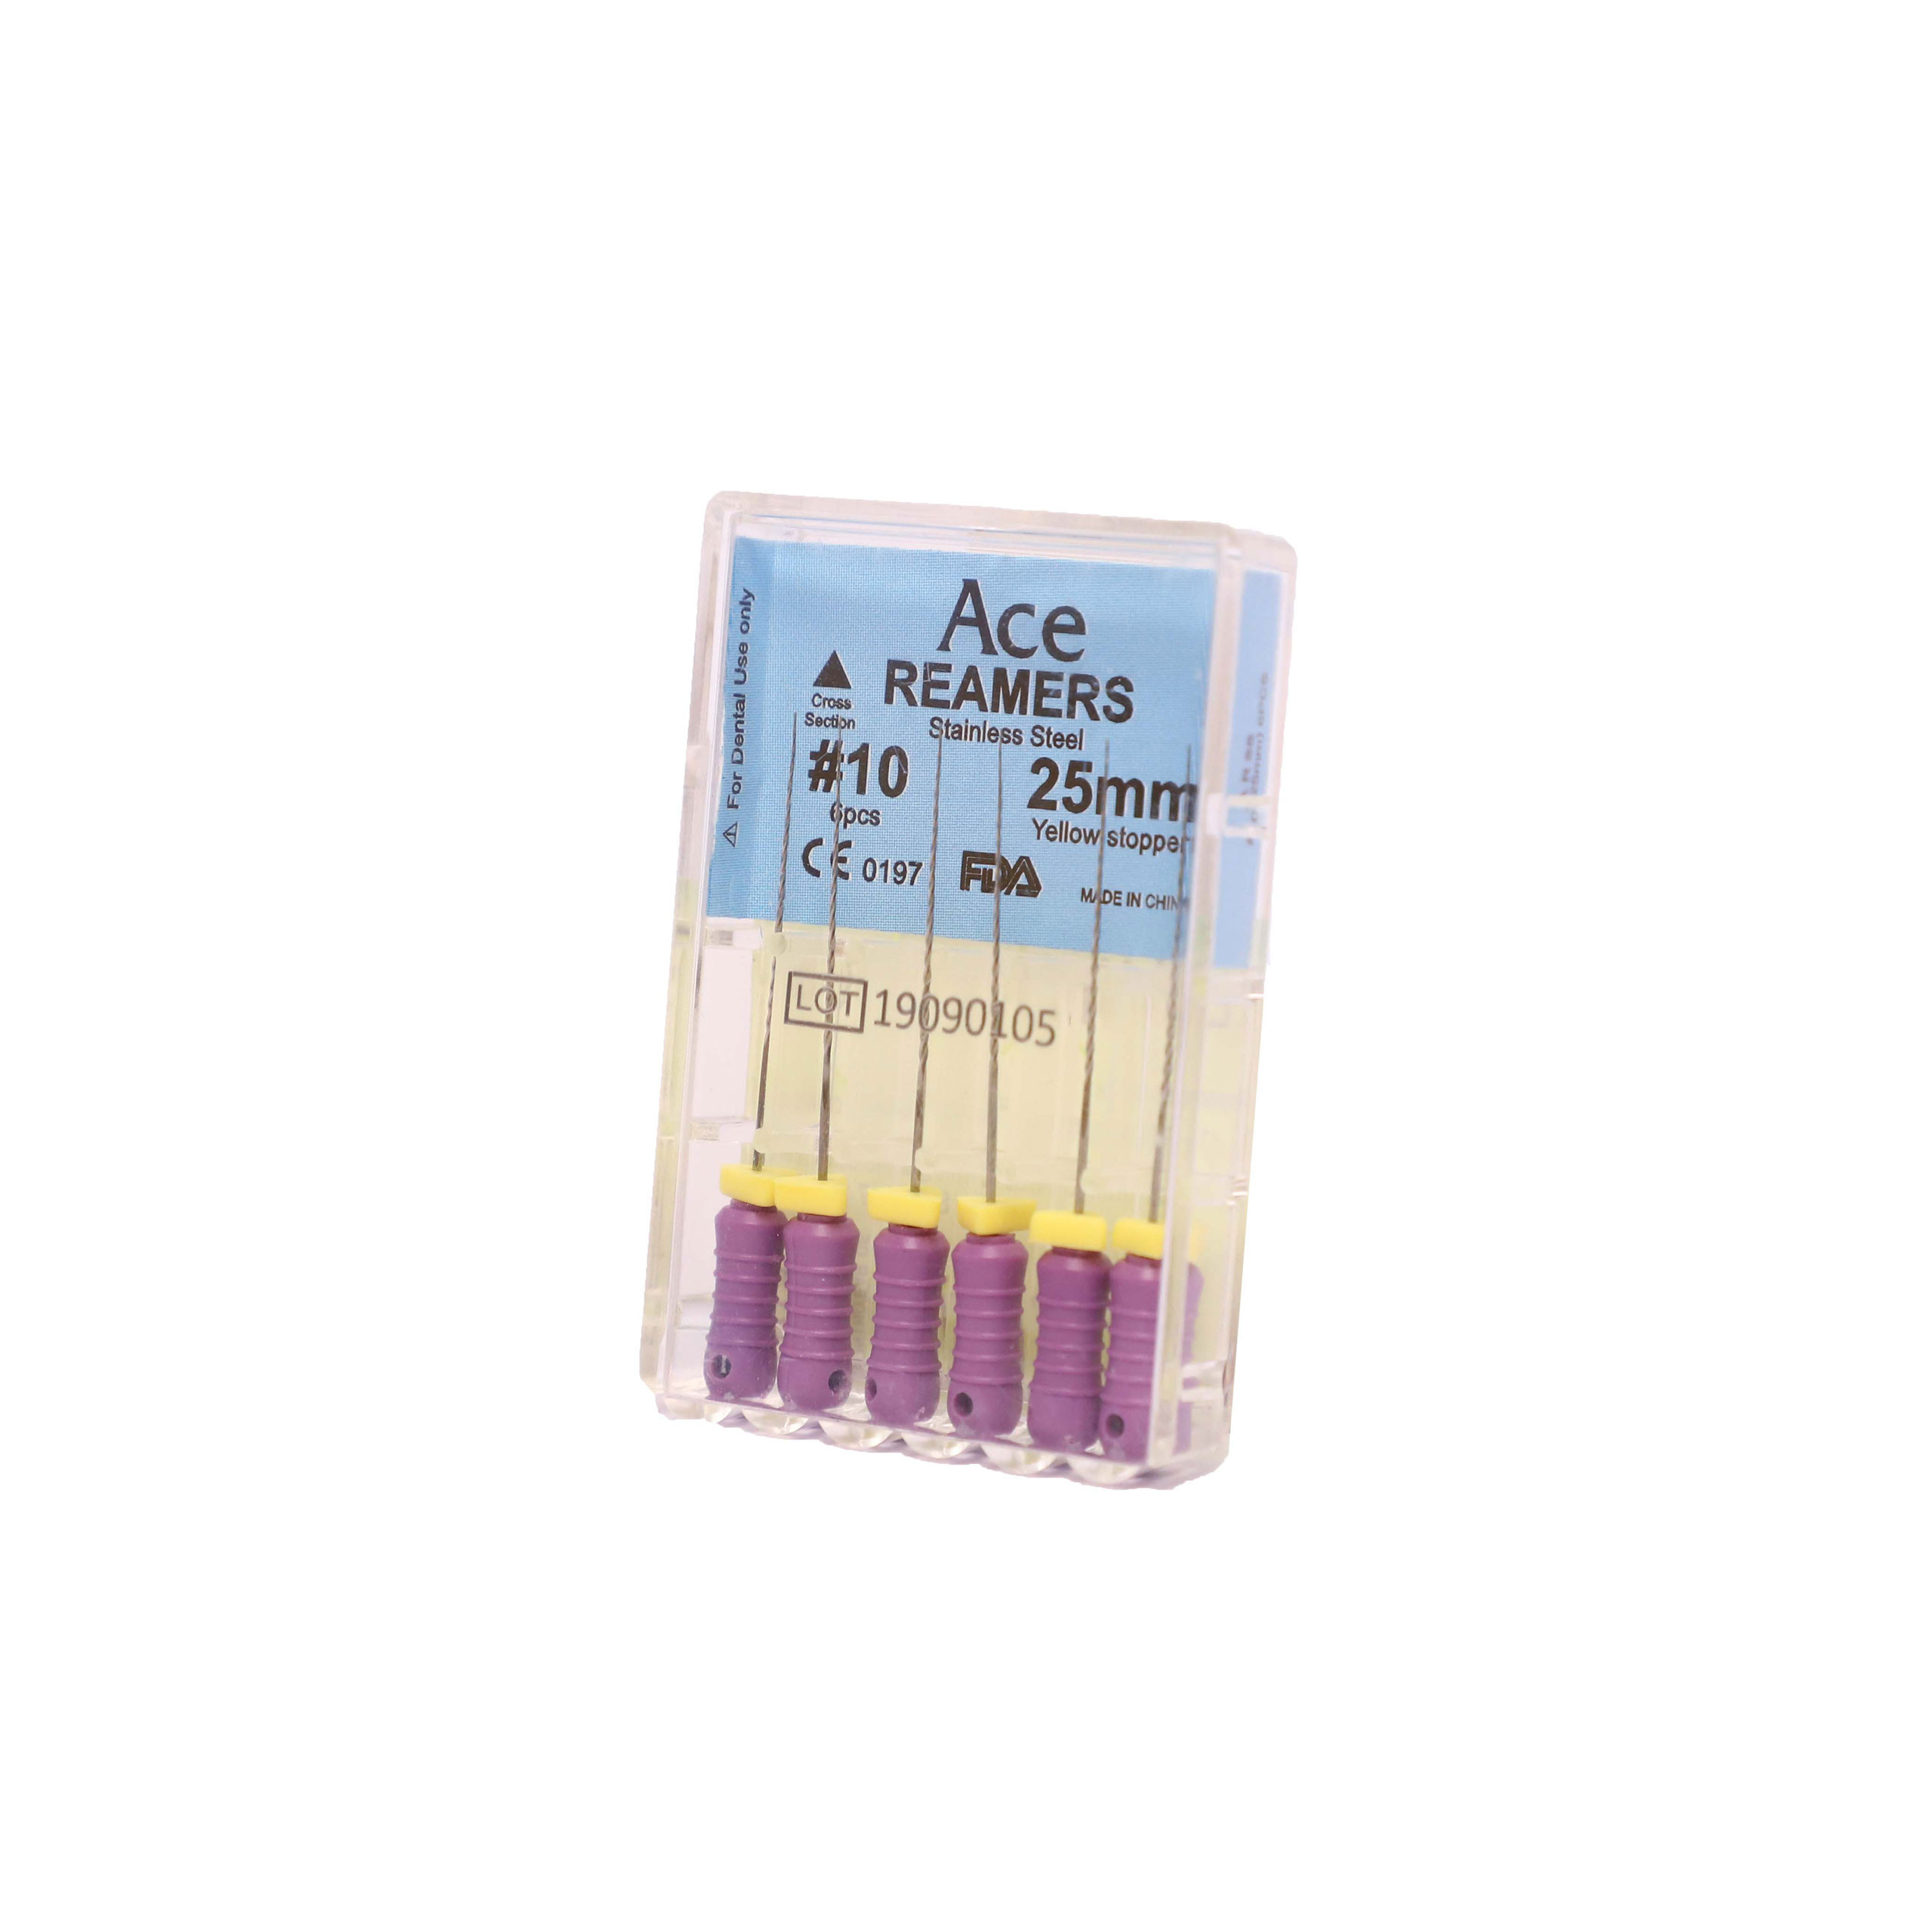 Ace Reamers #10, 25mm  (Pack of 5)